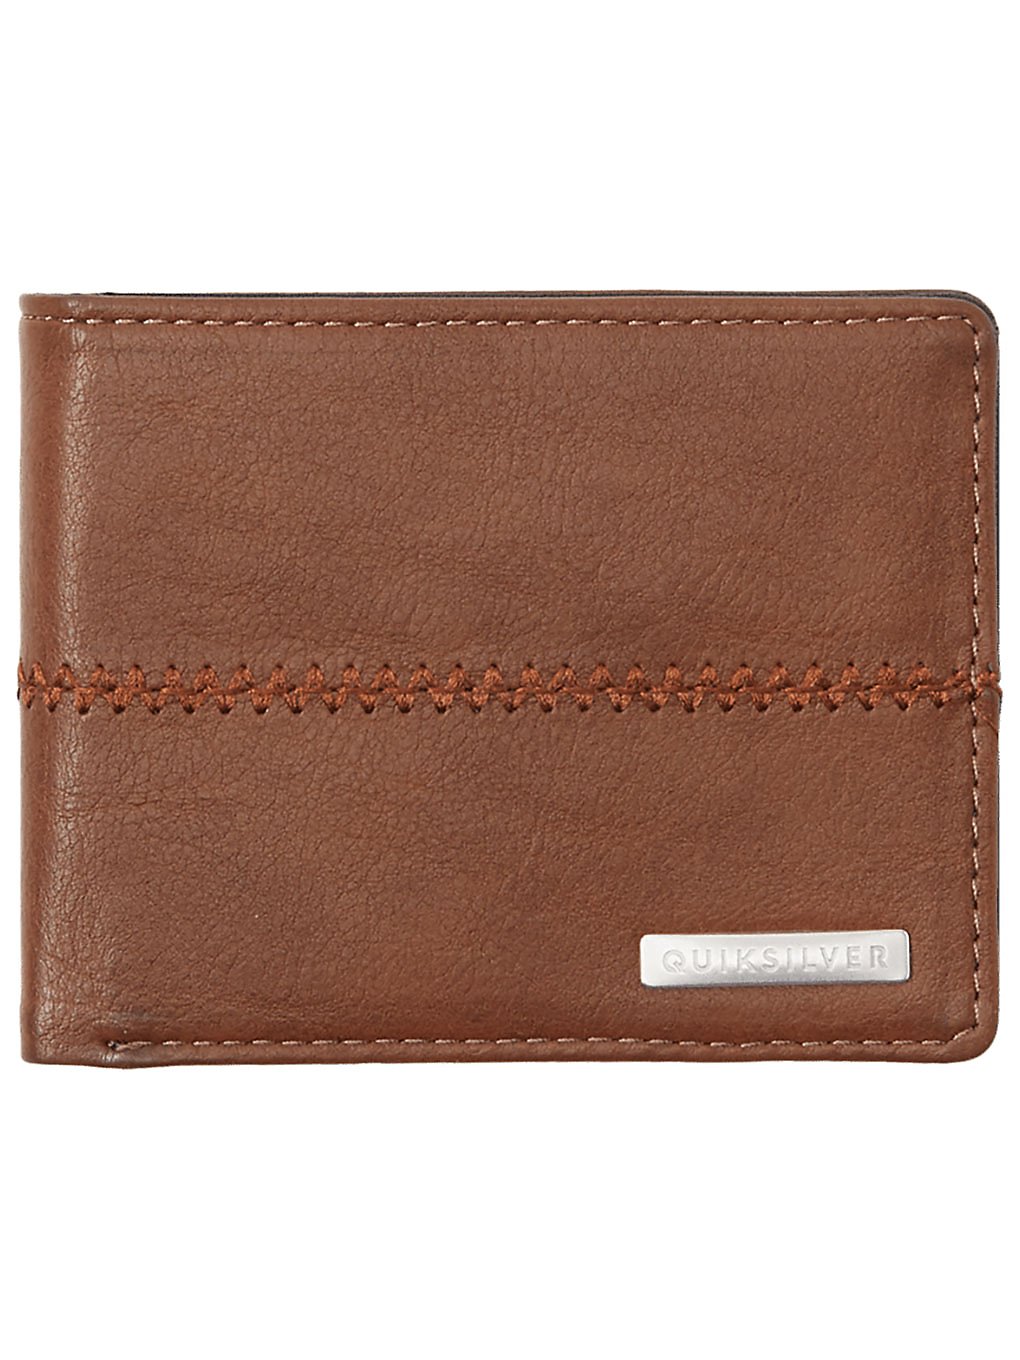 quiksilver stitchy 3 wallet chocolate brown